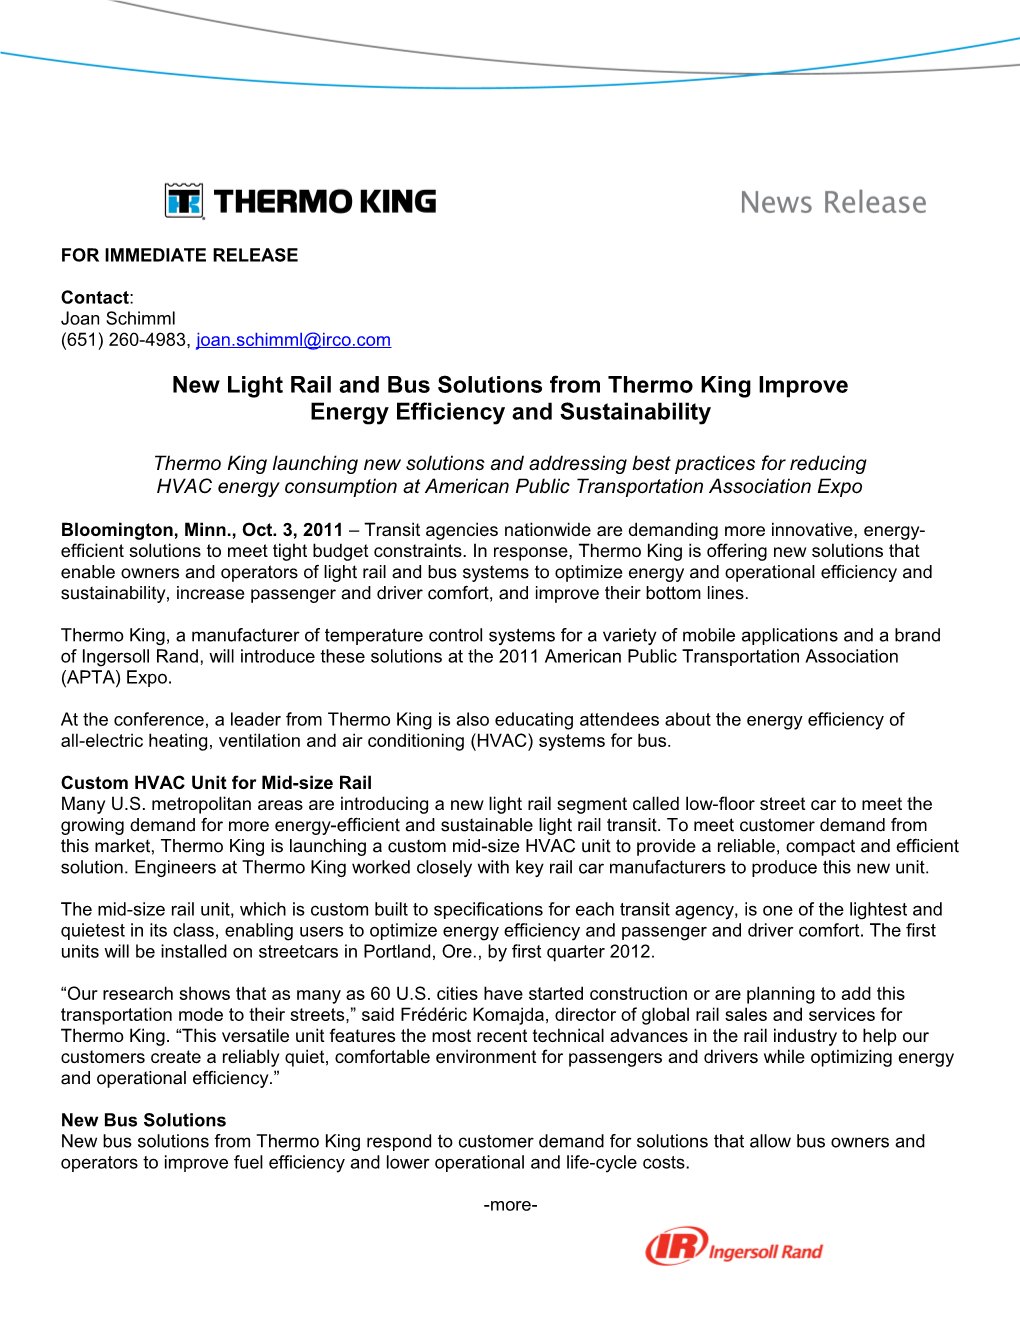 New Light Rail and Bus Solutions from Thermo King Improve